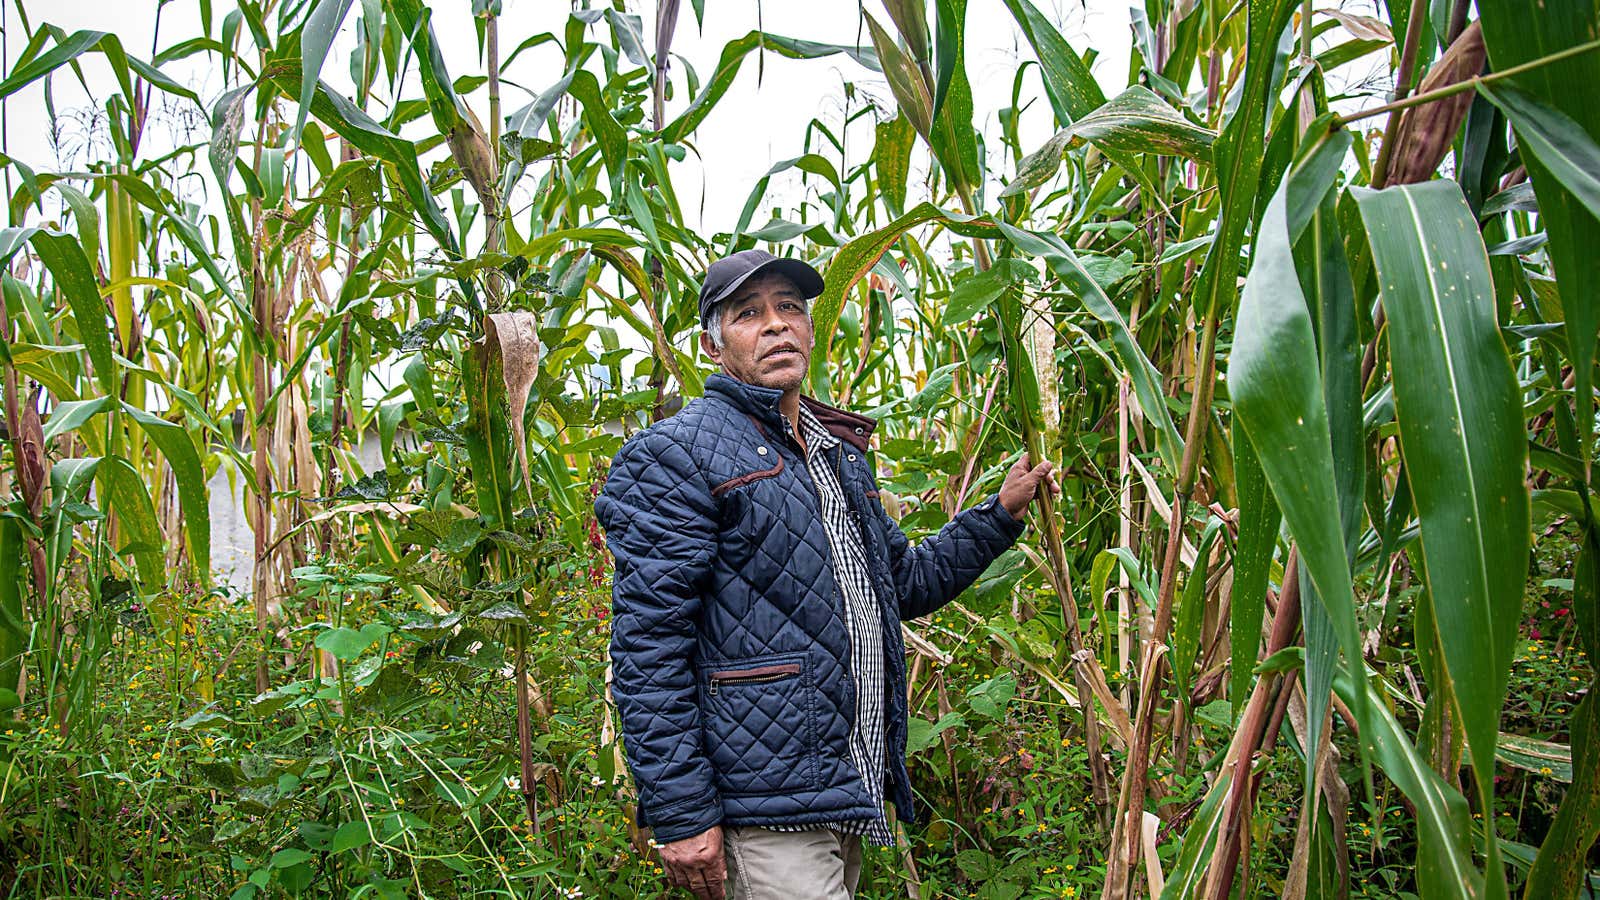 Campesinos grow rare varieties of maize whose genes may hold the key to more sustainable farming. If they go out of business, we’re in trouble.